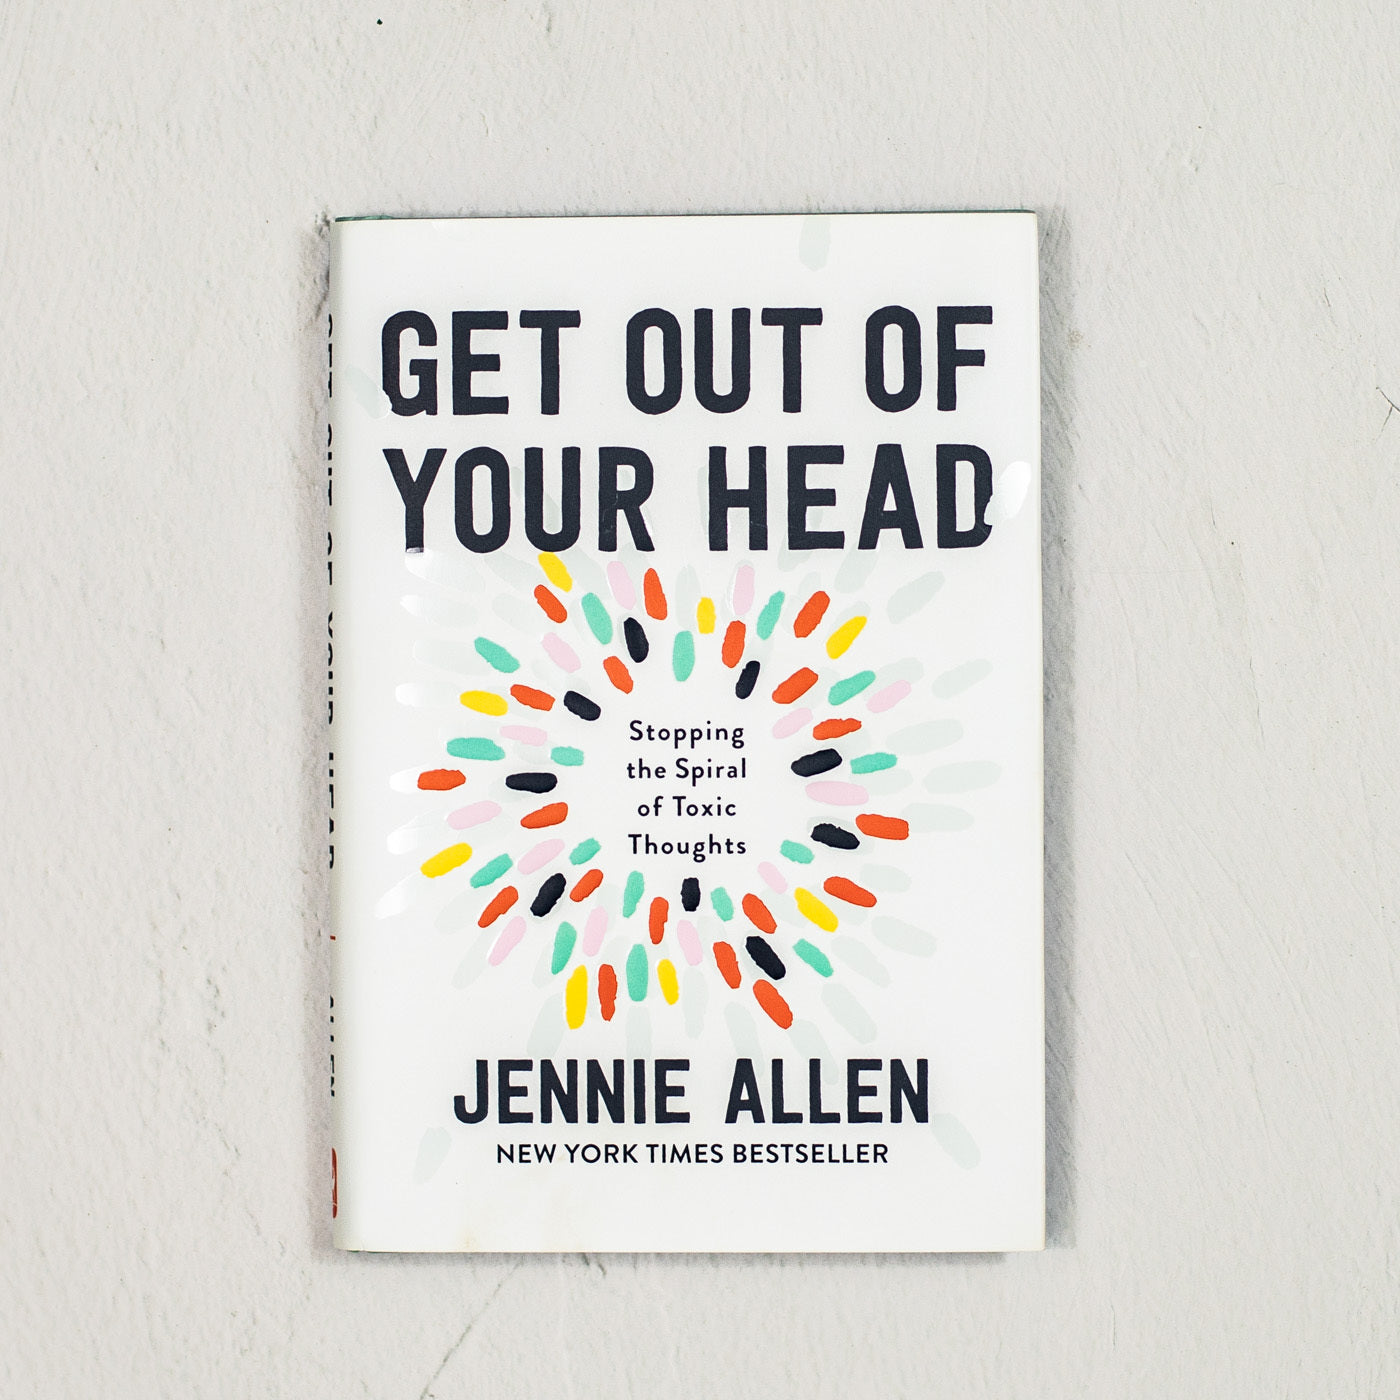 Get Out of Your Mind and Into Your Life for Teens: A Guide to